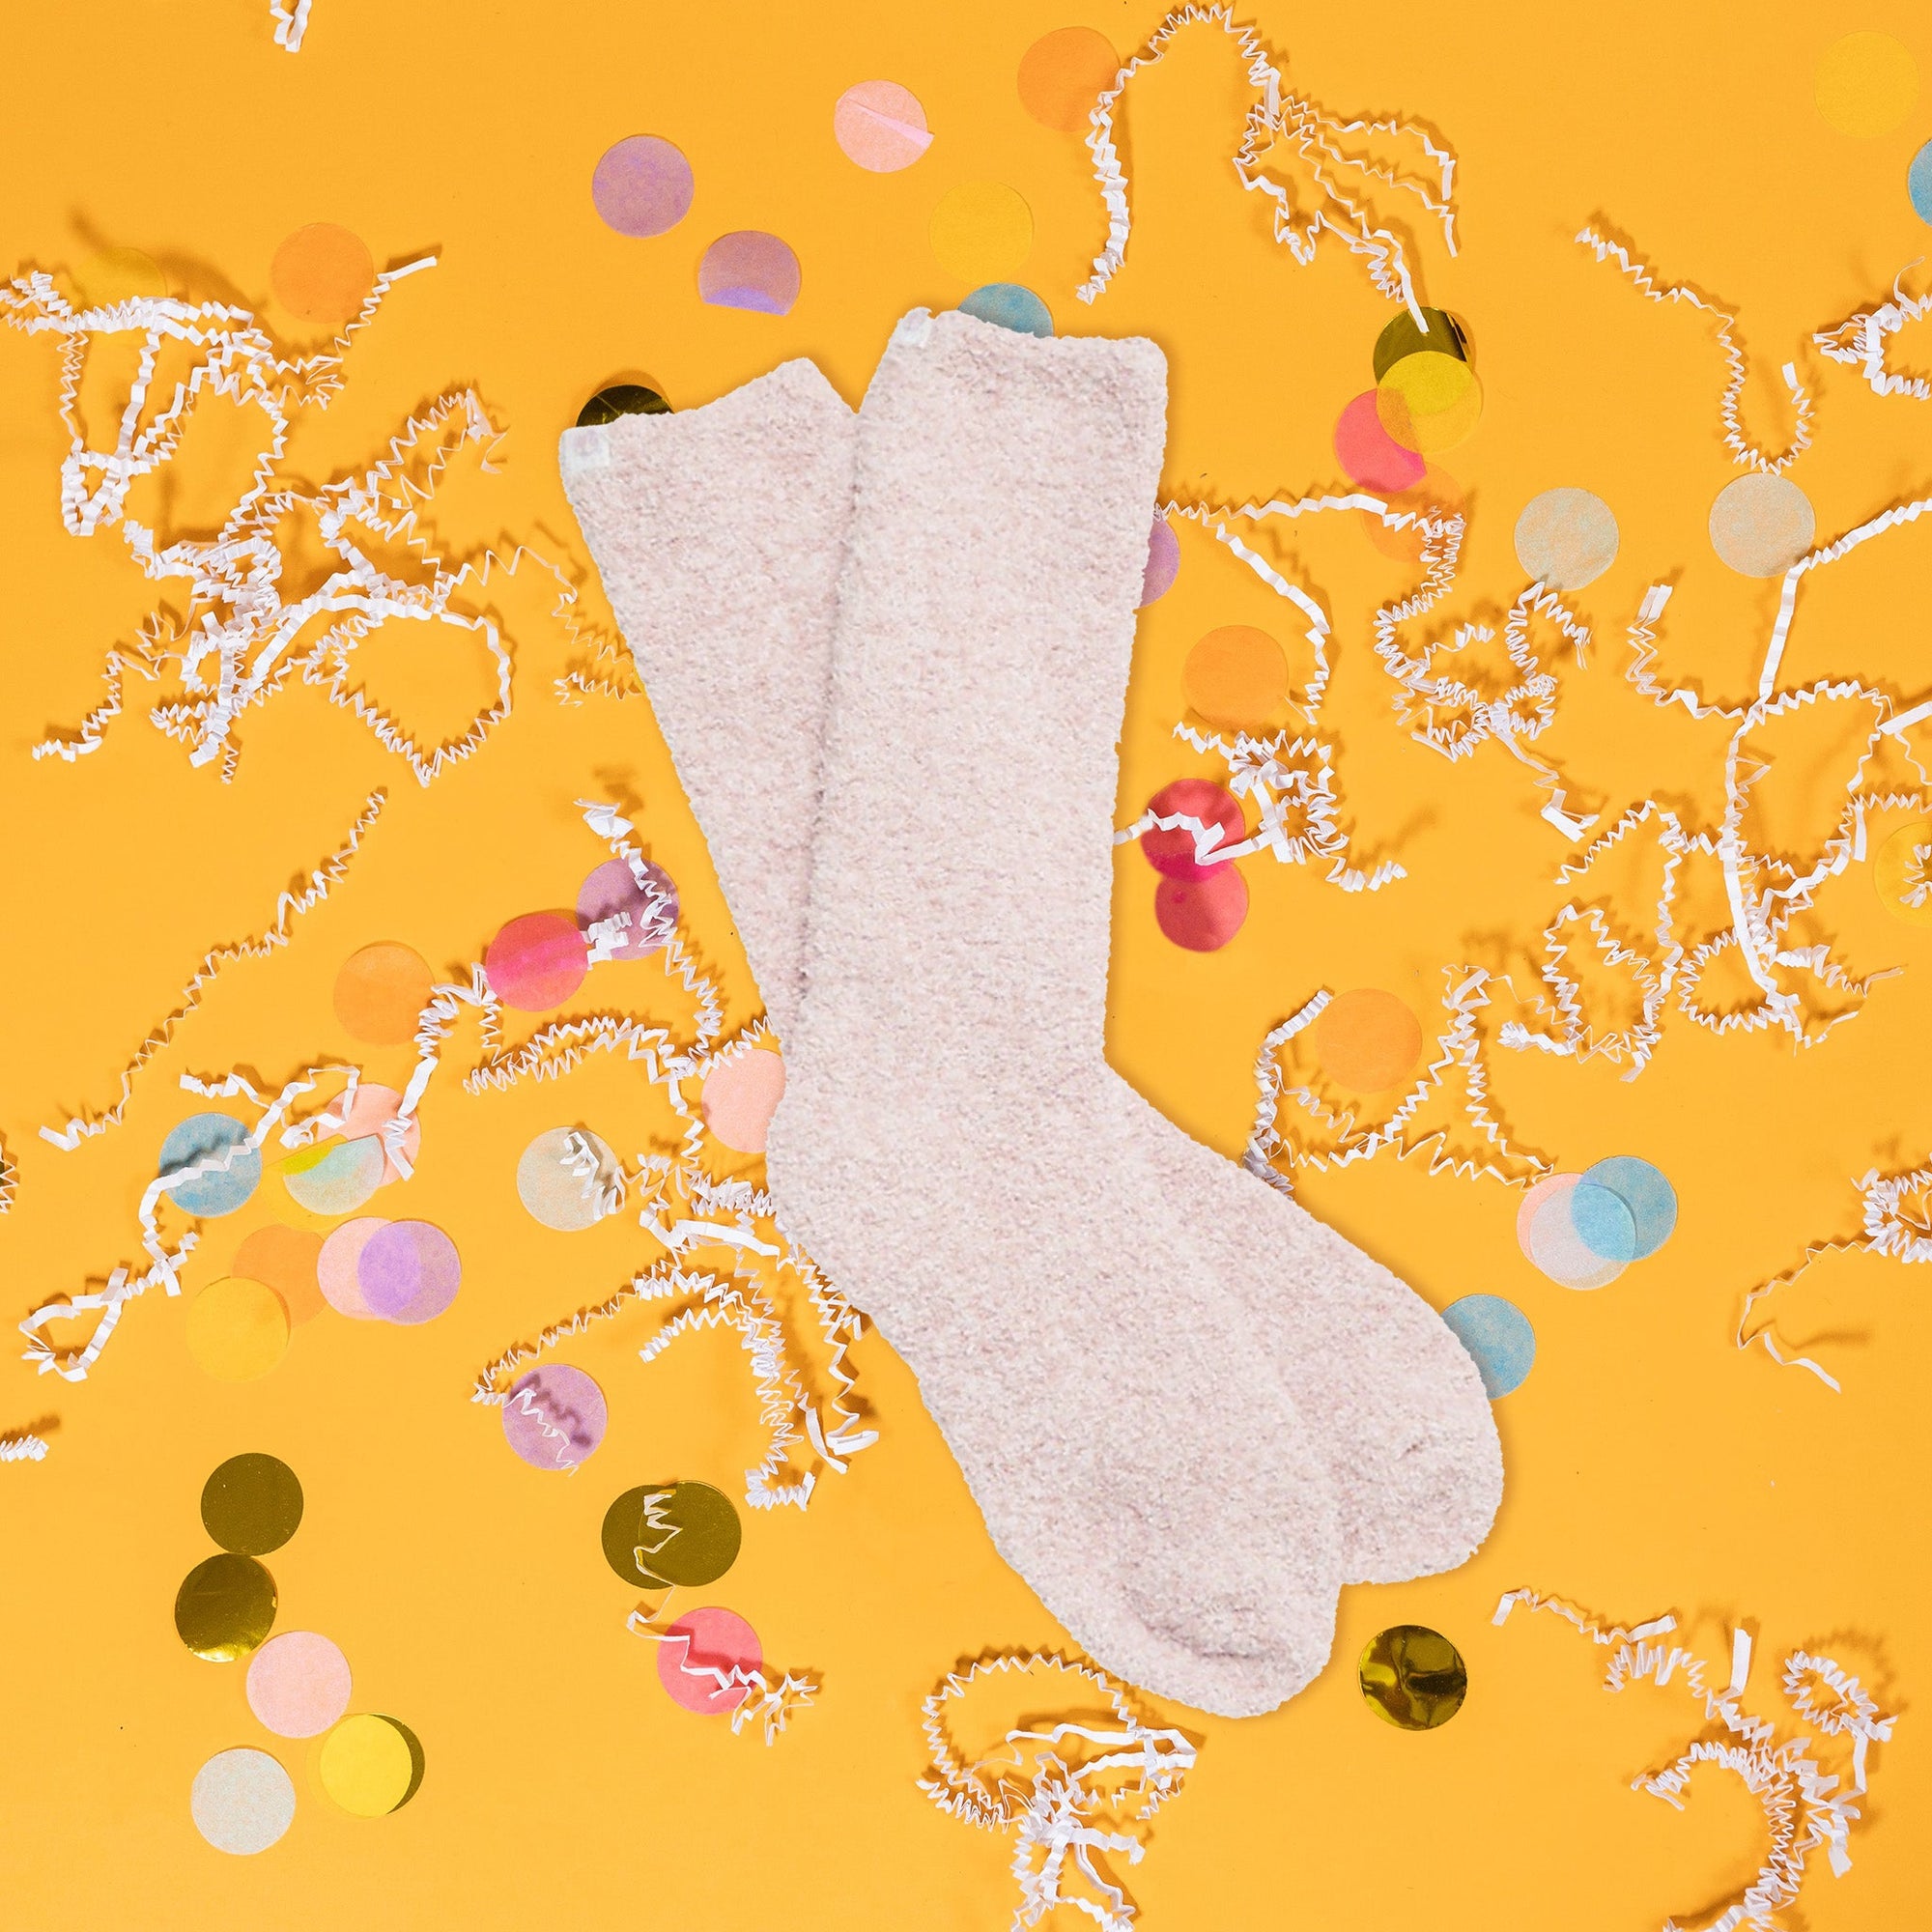 On a sunny mustard background sits a pair of socks with white crinkle and big, colorful confetti scattered around. These heathered socks are dusty rose and white and so soft.